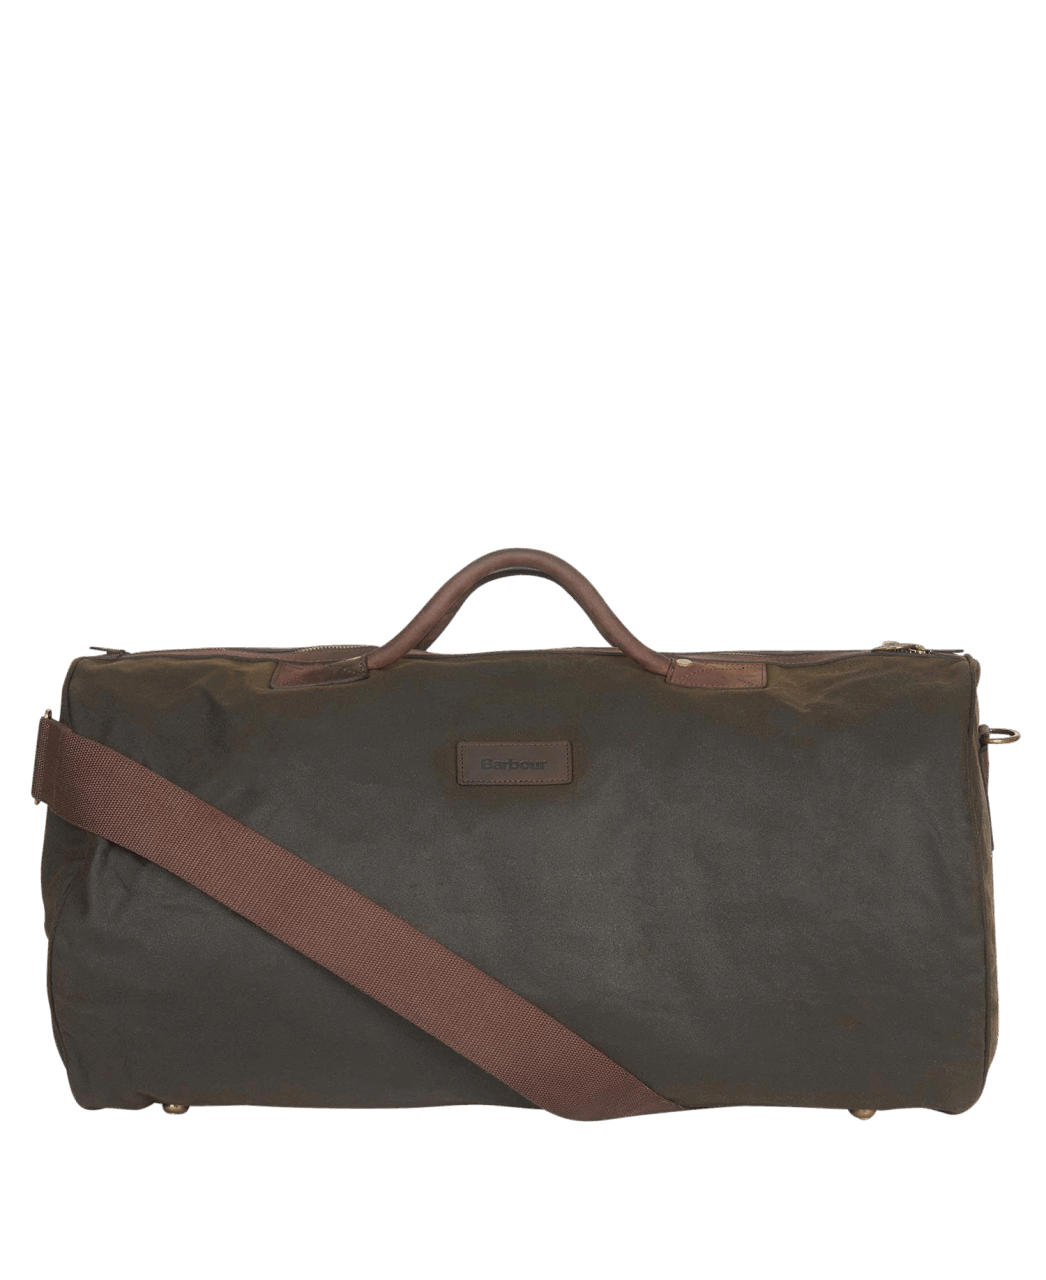 Barbour Wax Holdall Bag - navy